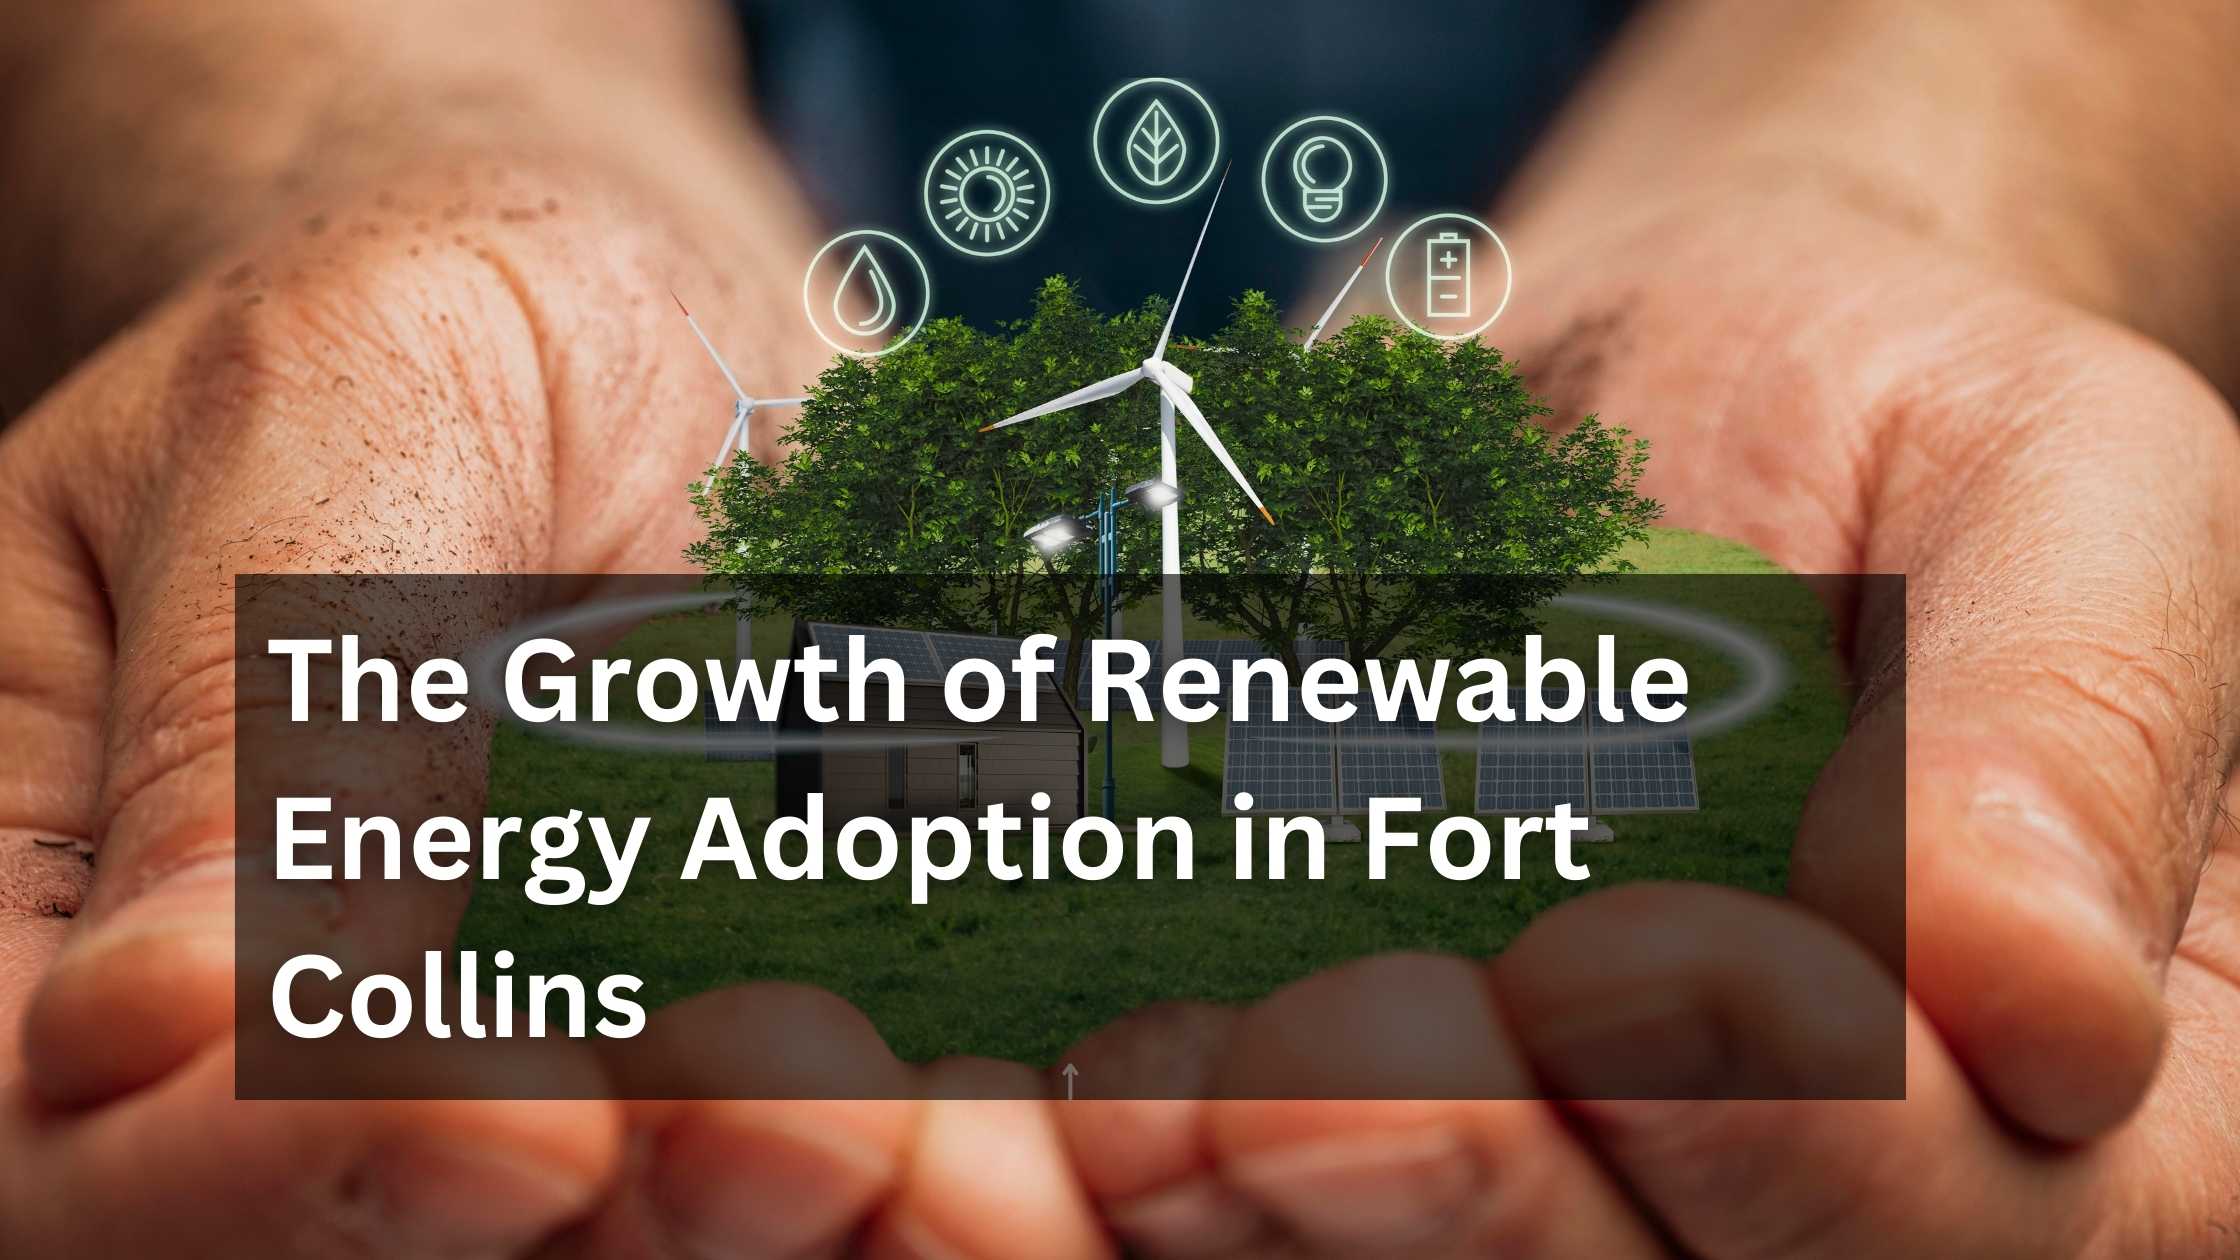 The Growth of Renewable Energy Adoption in Fort Collins